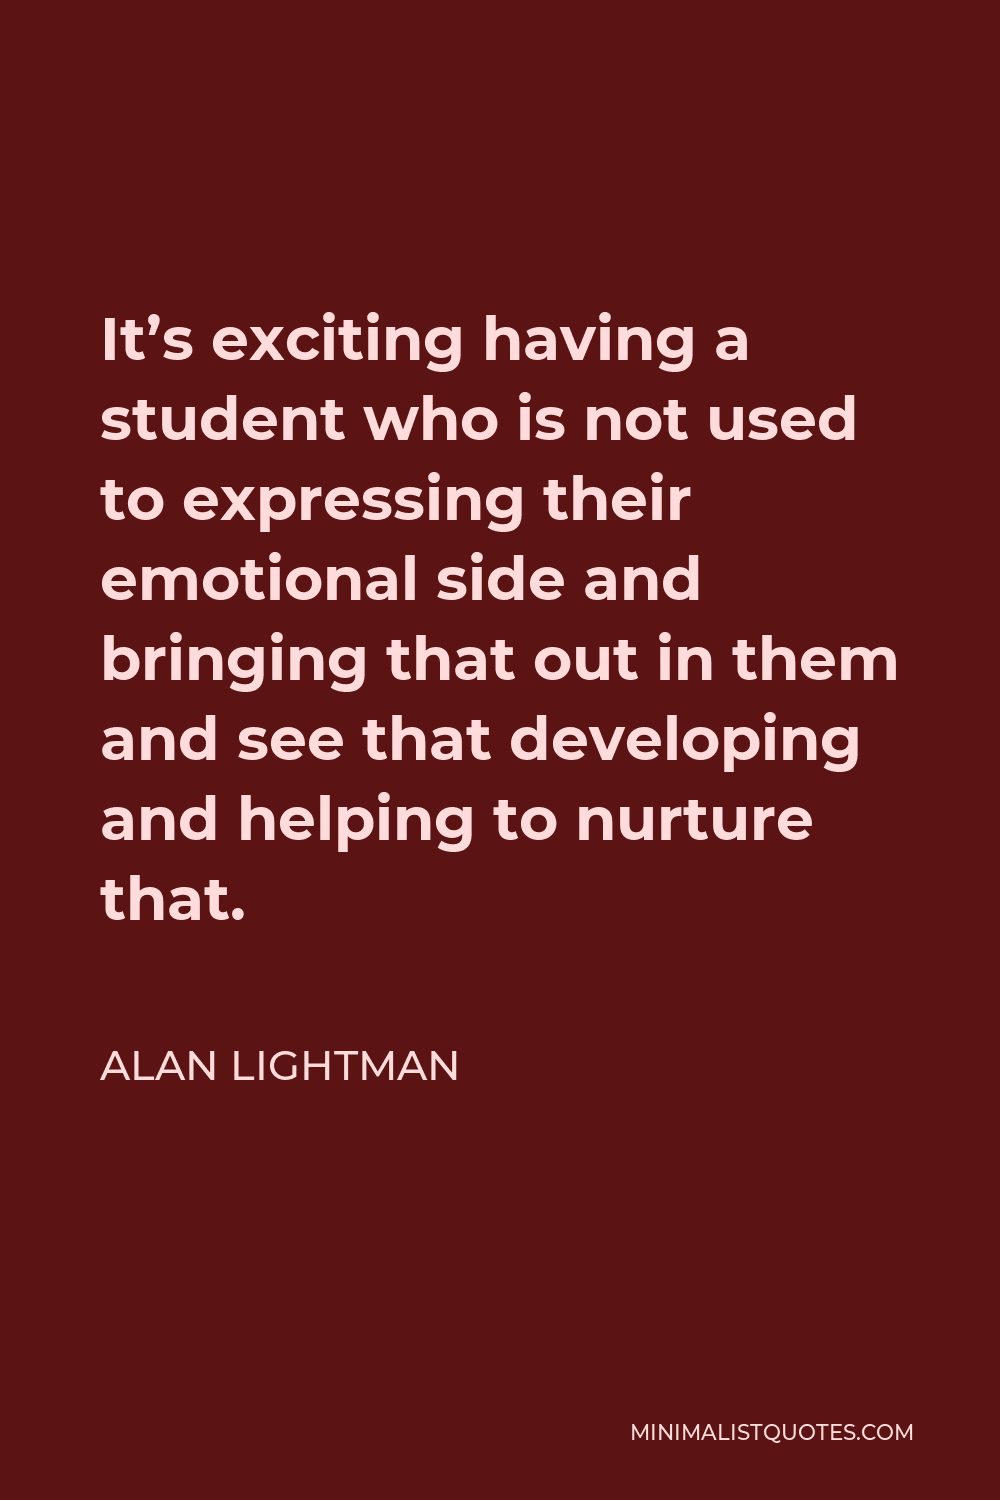 Alan Lightman Quote - It’s exciting having a student who is not used to expressing their emotional side and bringing that out in them and see that developing and helping to nurture that.